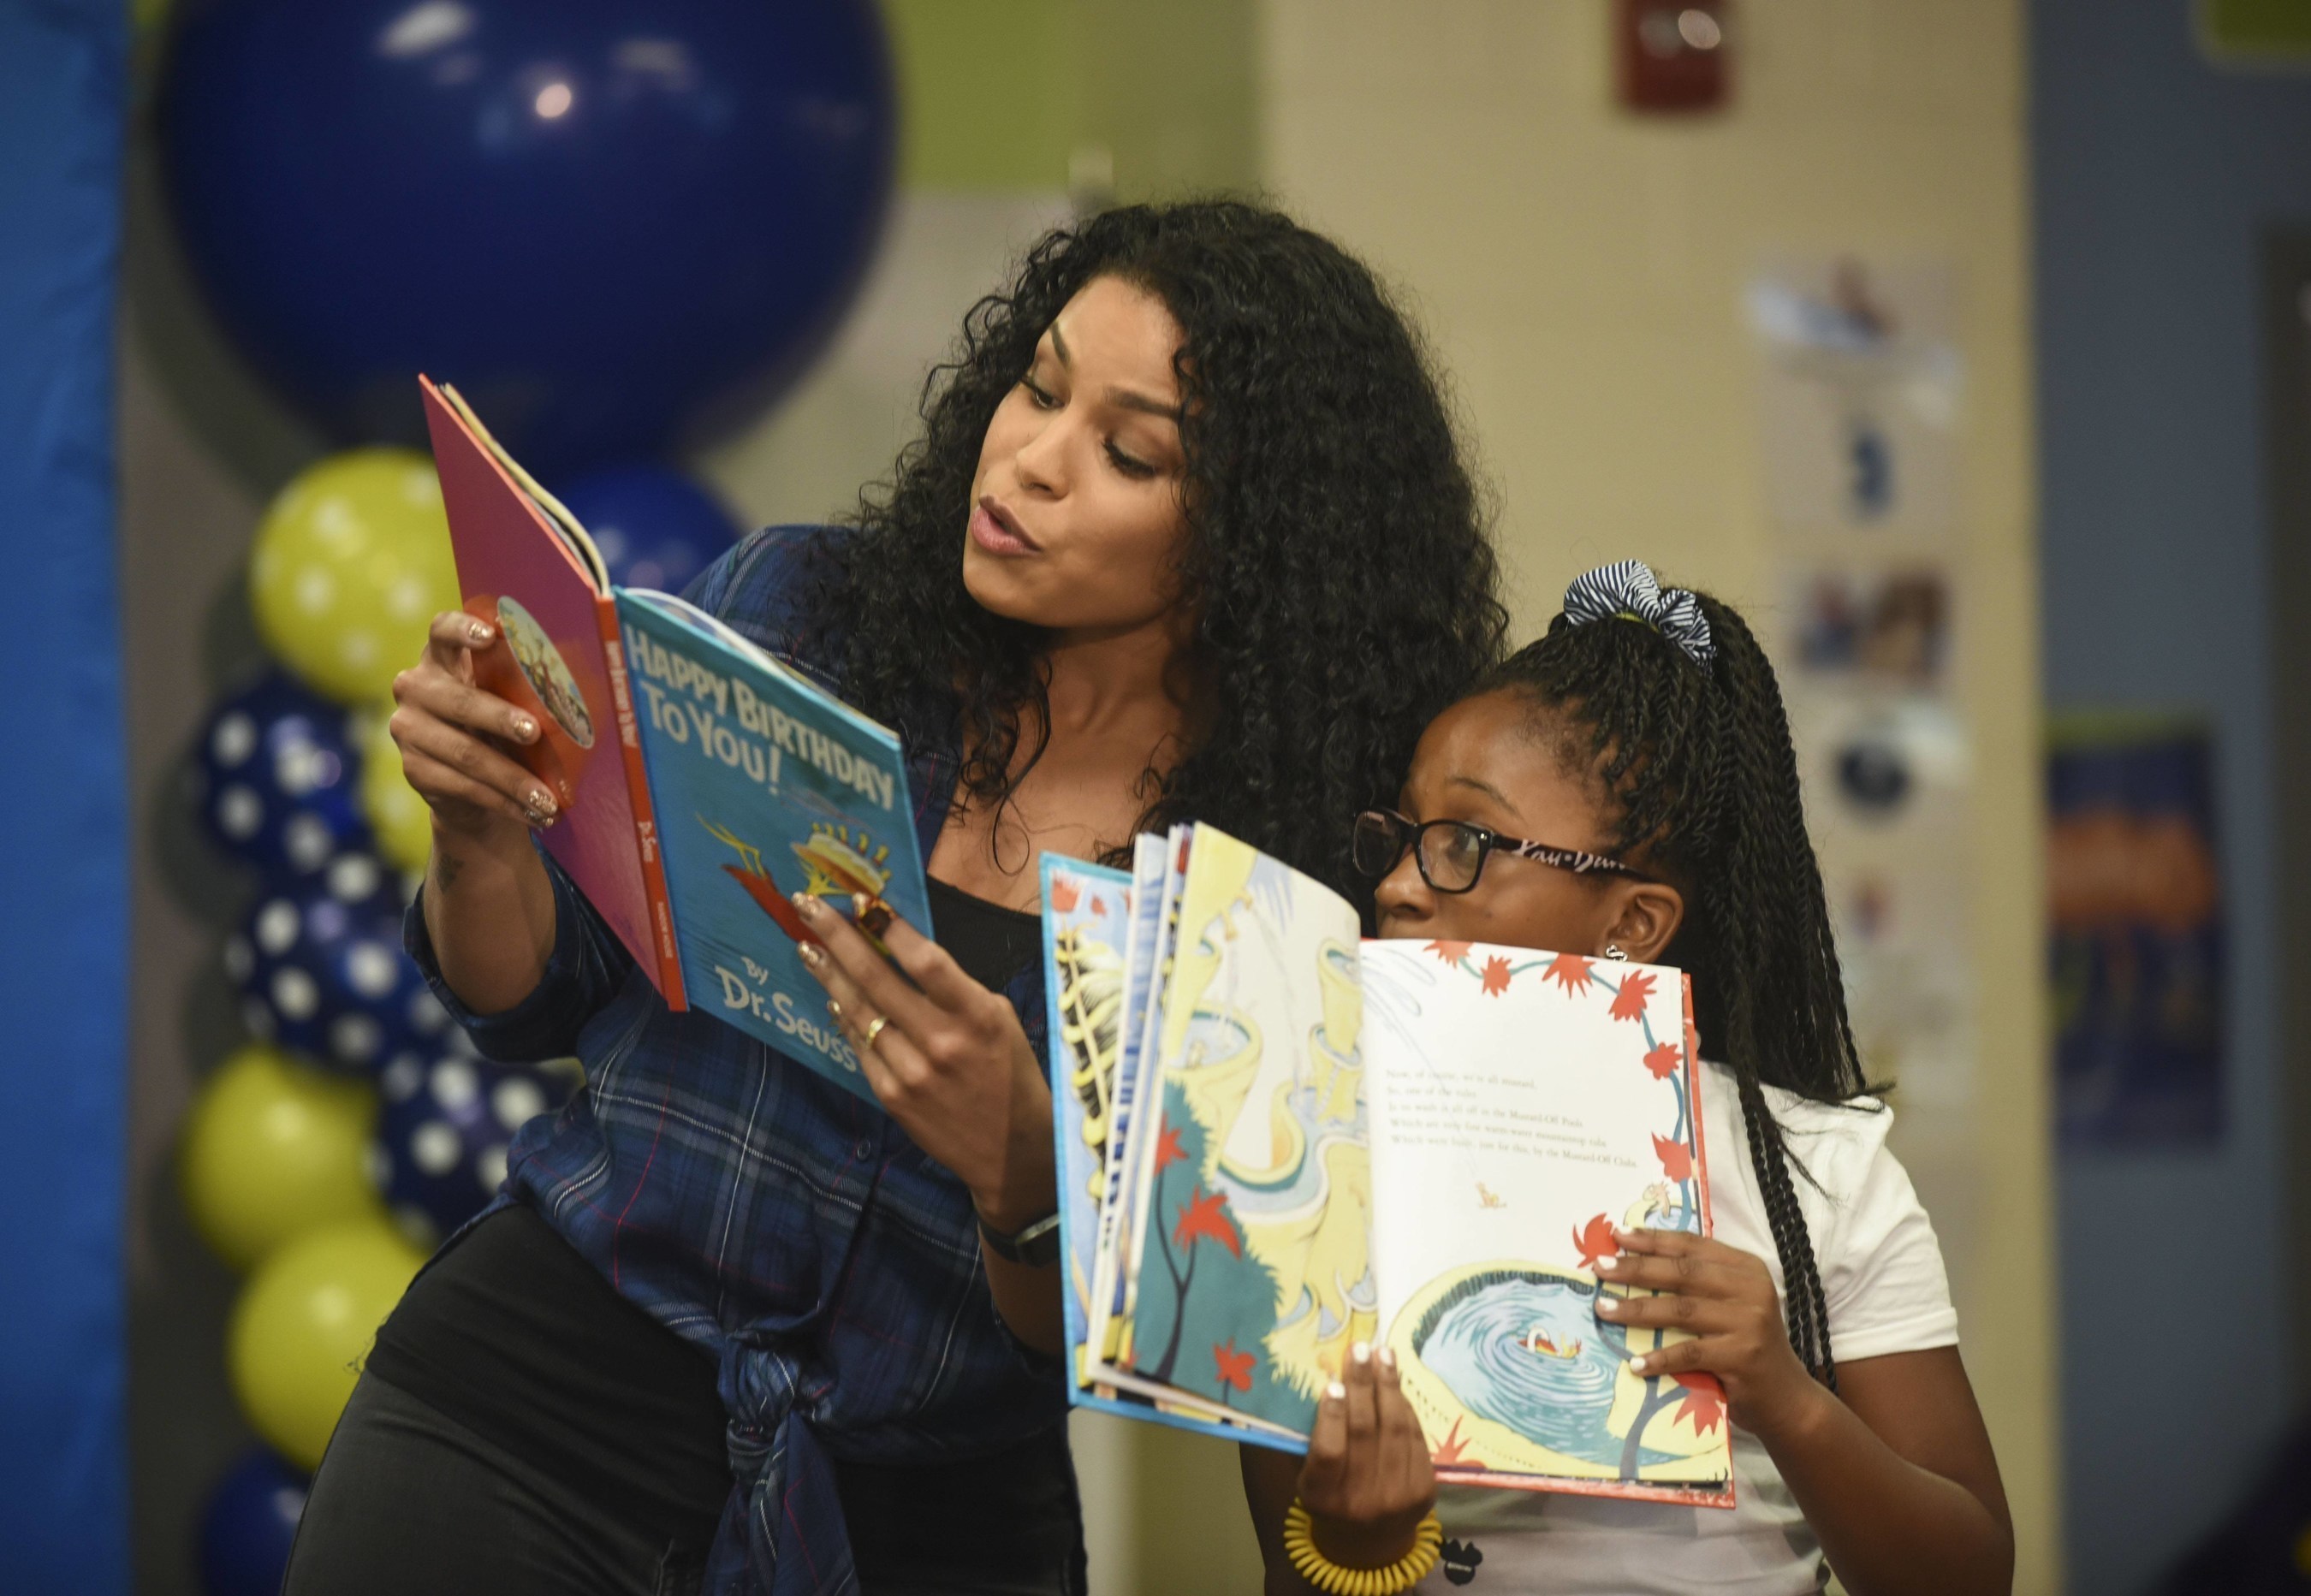 Singer and actress Jordin Sparks reads from Dr. Seuss' "Happy Birthday to You!" with a student from Amidon-Bowen Elementary School during Reading Is Fundamental's 50th Anniversary on Wednesday, Sept. 14, 2016, in Washington. (Kevin Wolf/AP Images for Reading Is Fundamental)